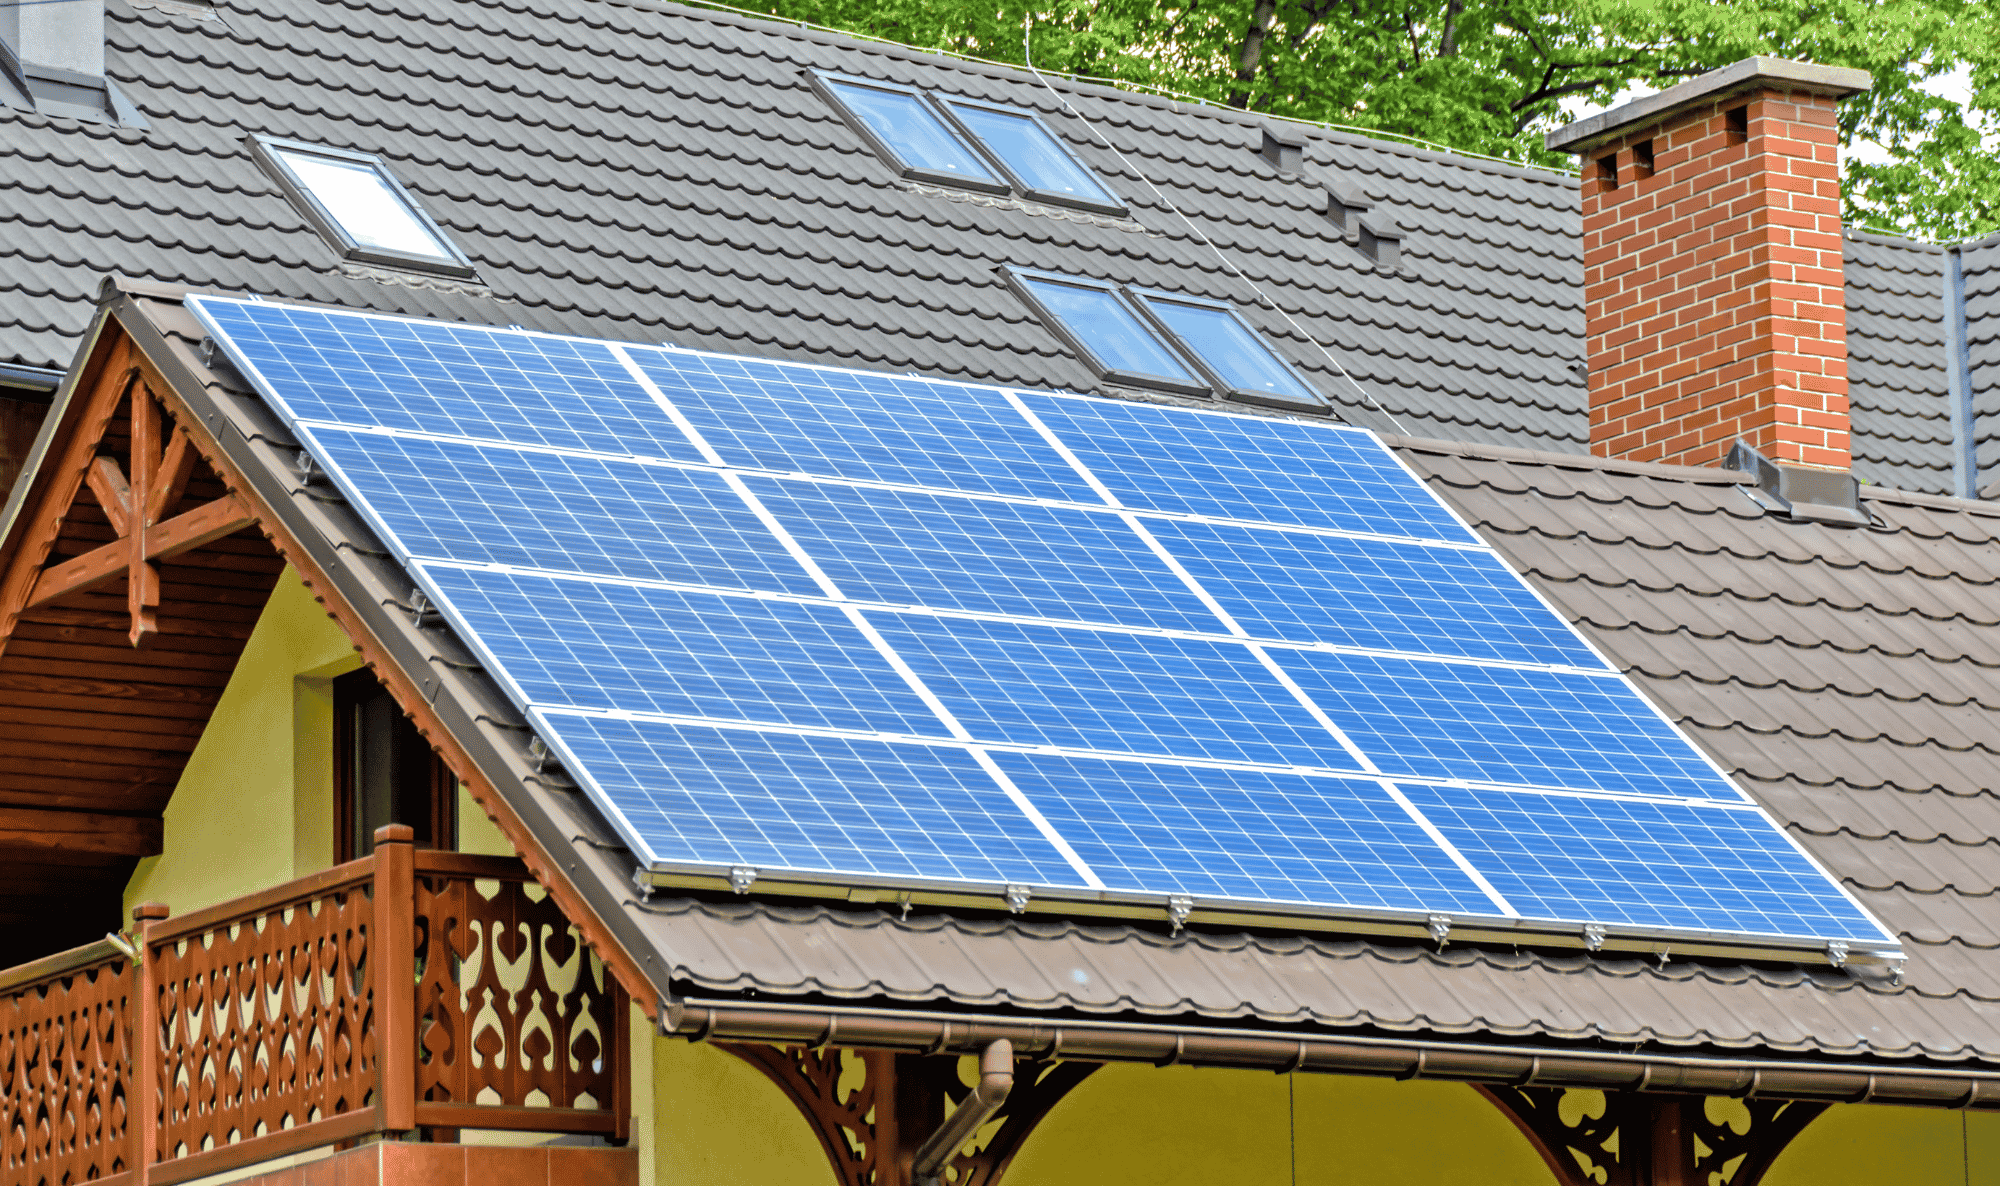 Solar Panels Doesn't Have To Be Hard. Read These 9 Tricks Go Get A Head Start.